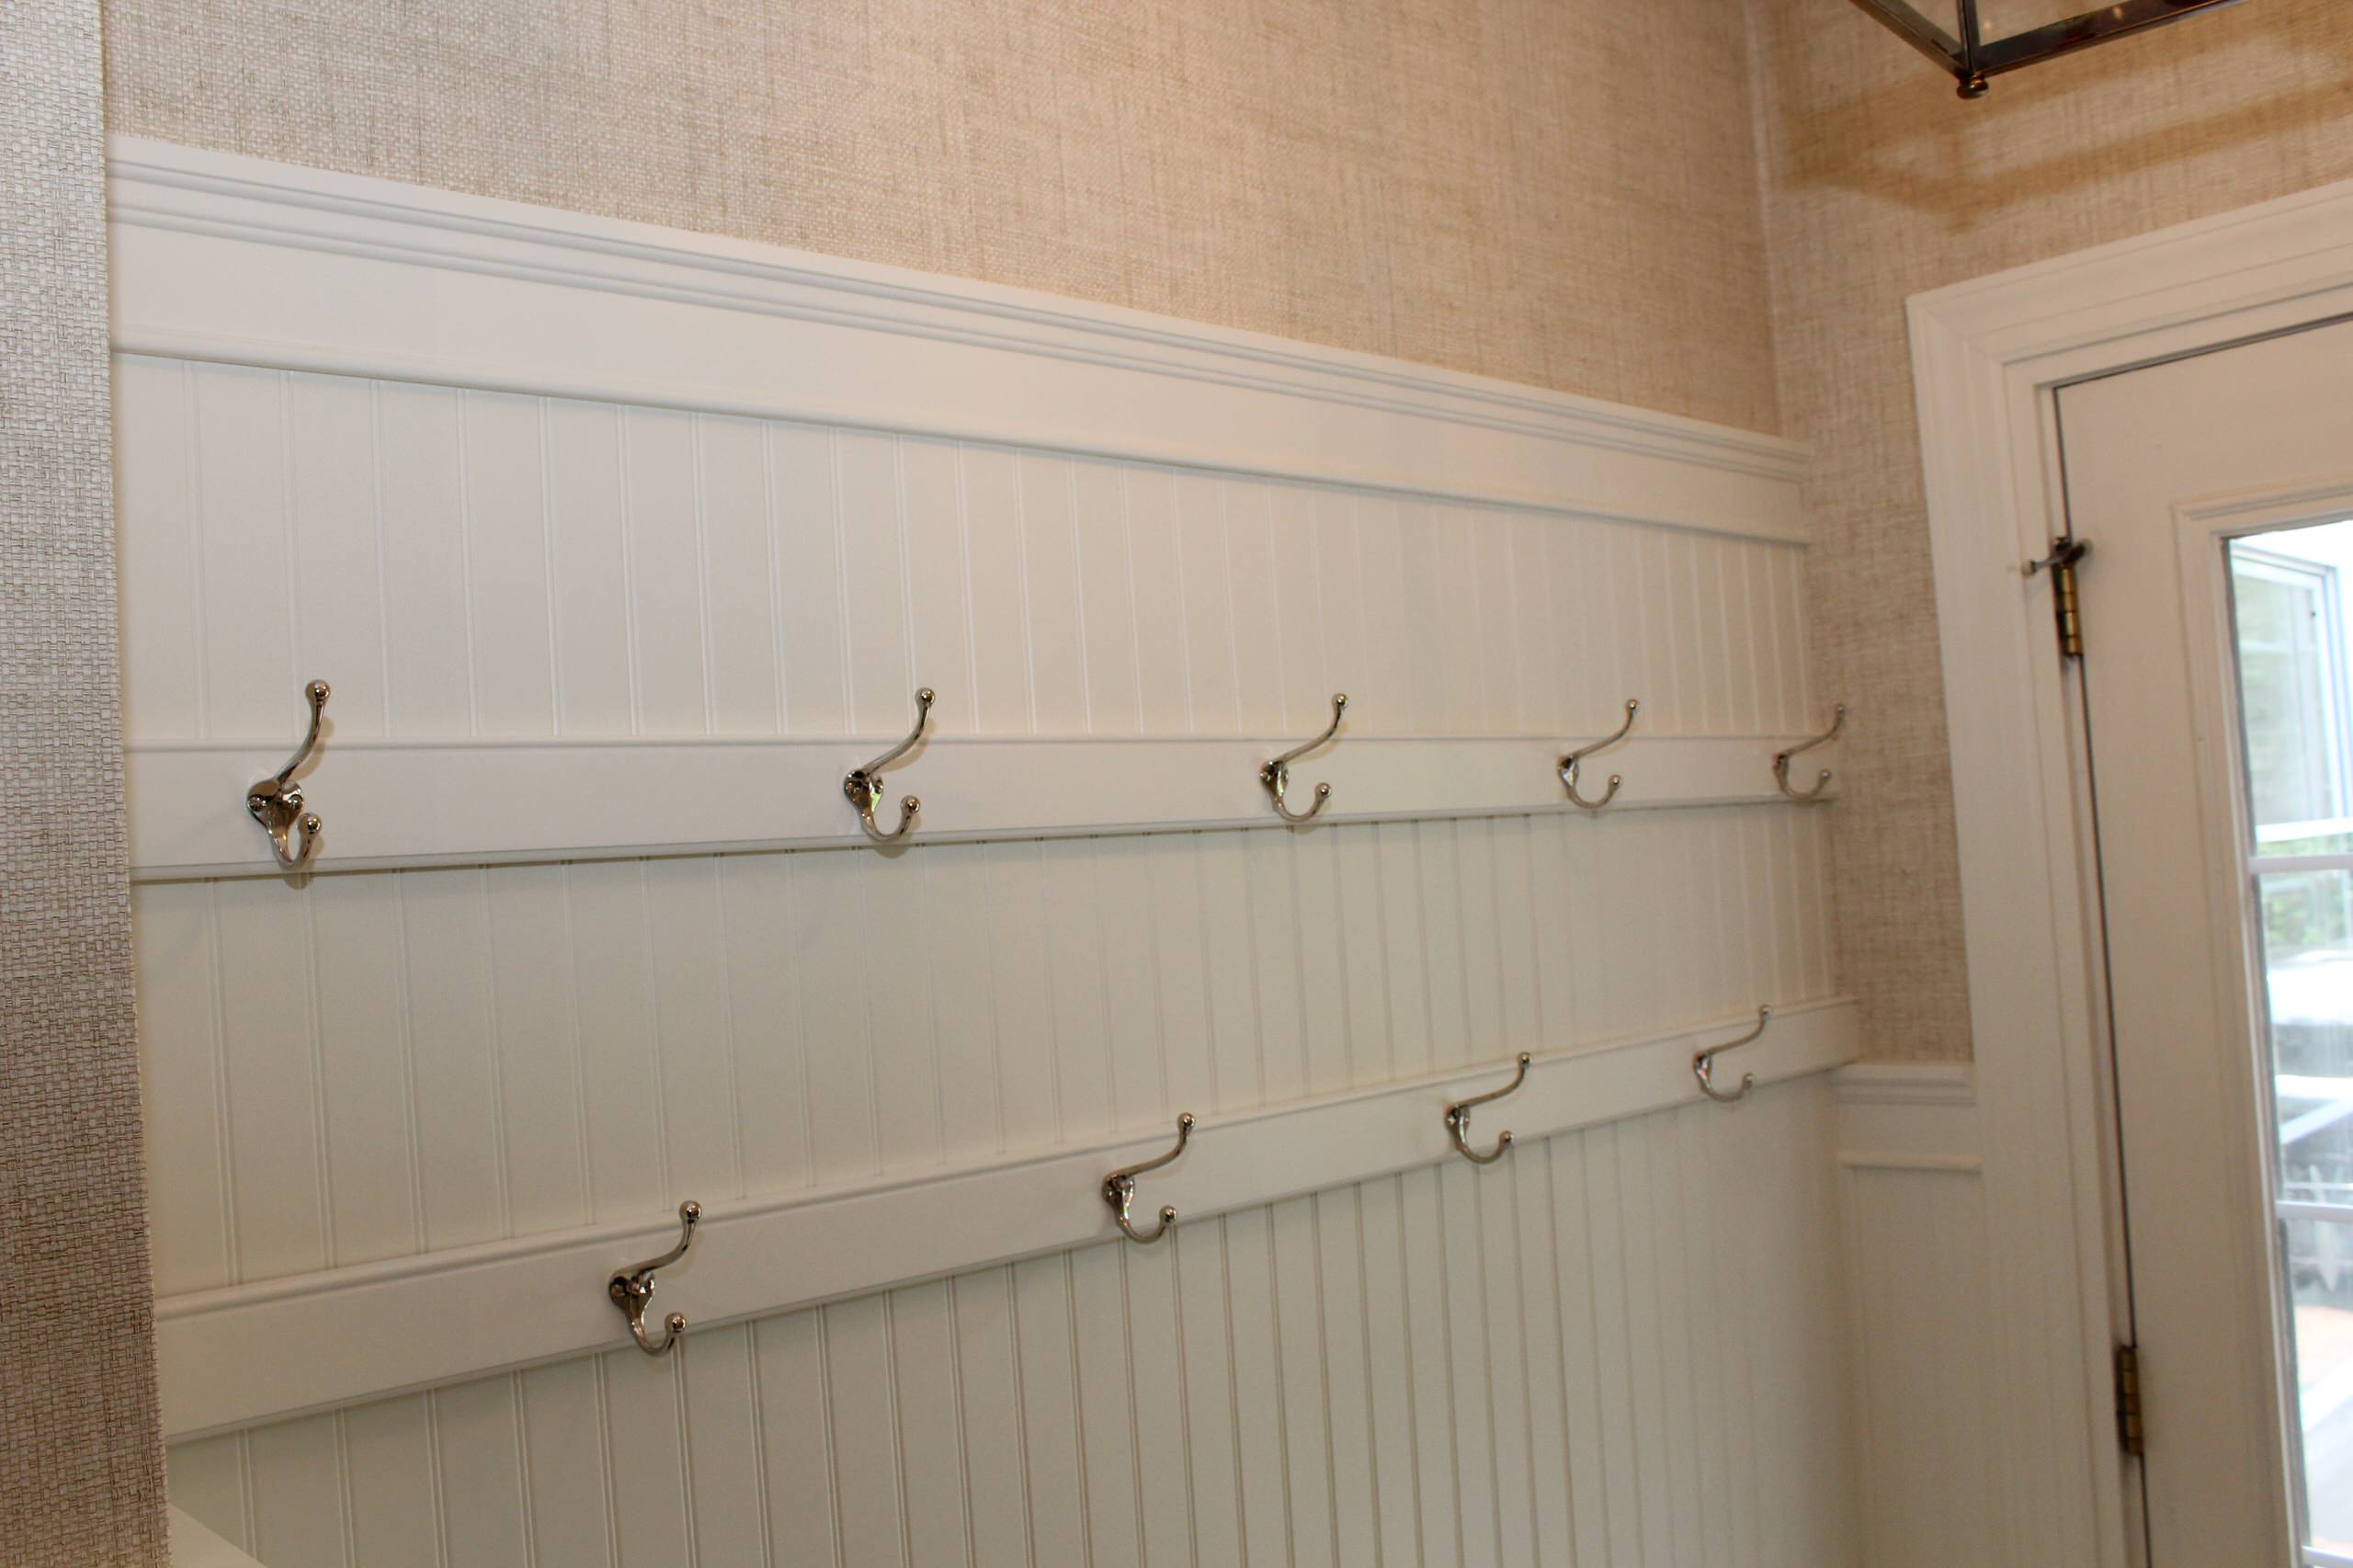 North Shore Bead Board Wainscoting And Wall covering Installation